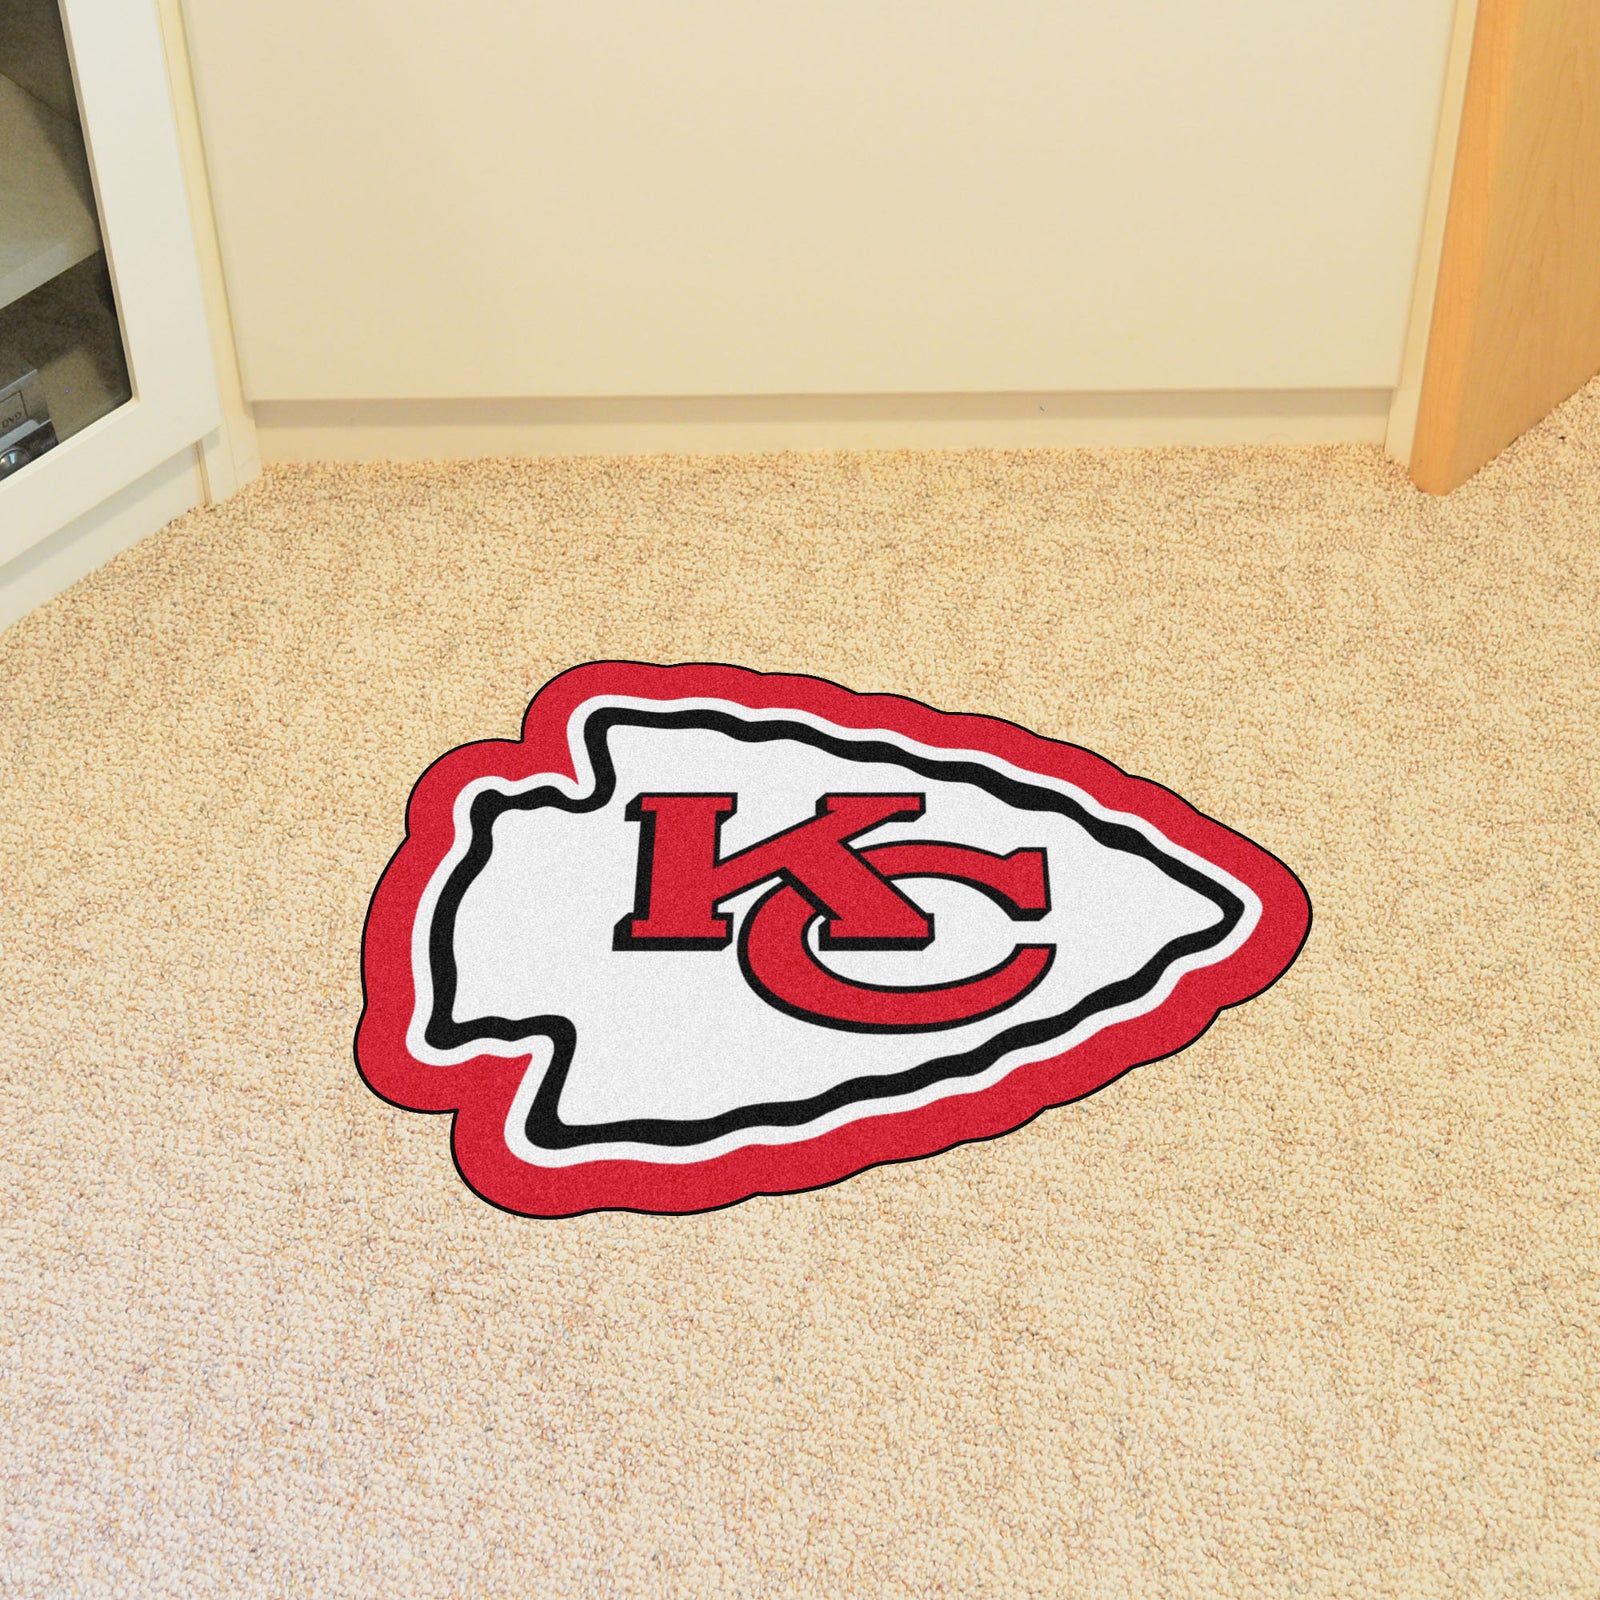 NFL Team Repeat Rug - Kansas City Chiefs (Red Background), 3'10x5'4 -  Kansas City Chiefs (Red Background) | NFL Team Repeat Rug